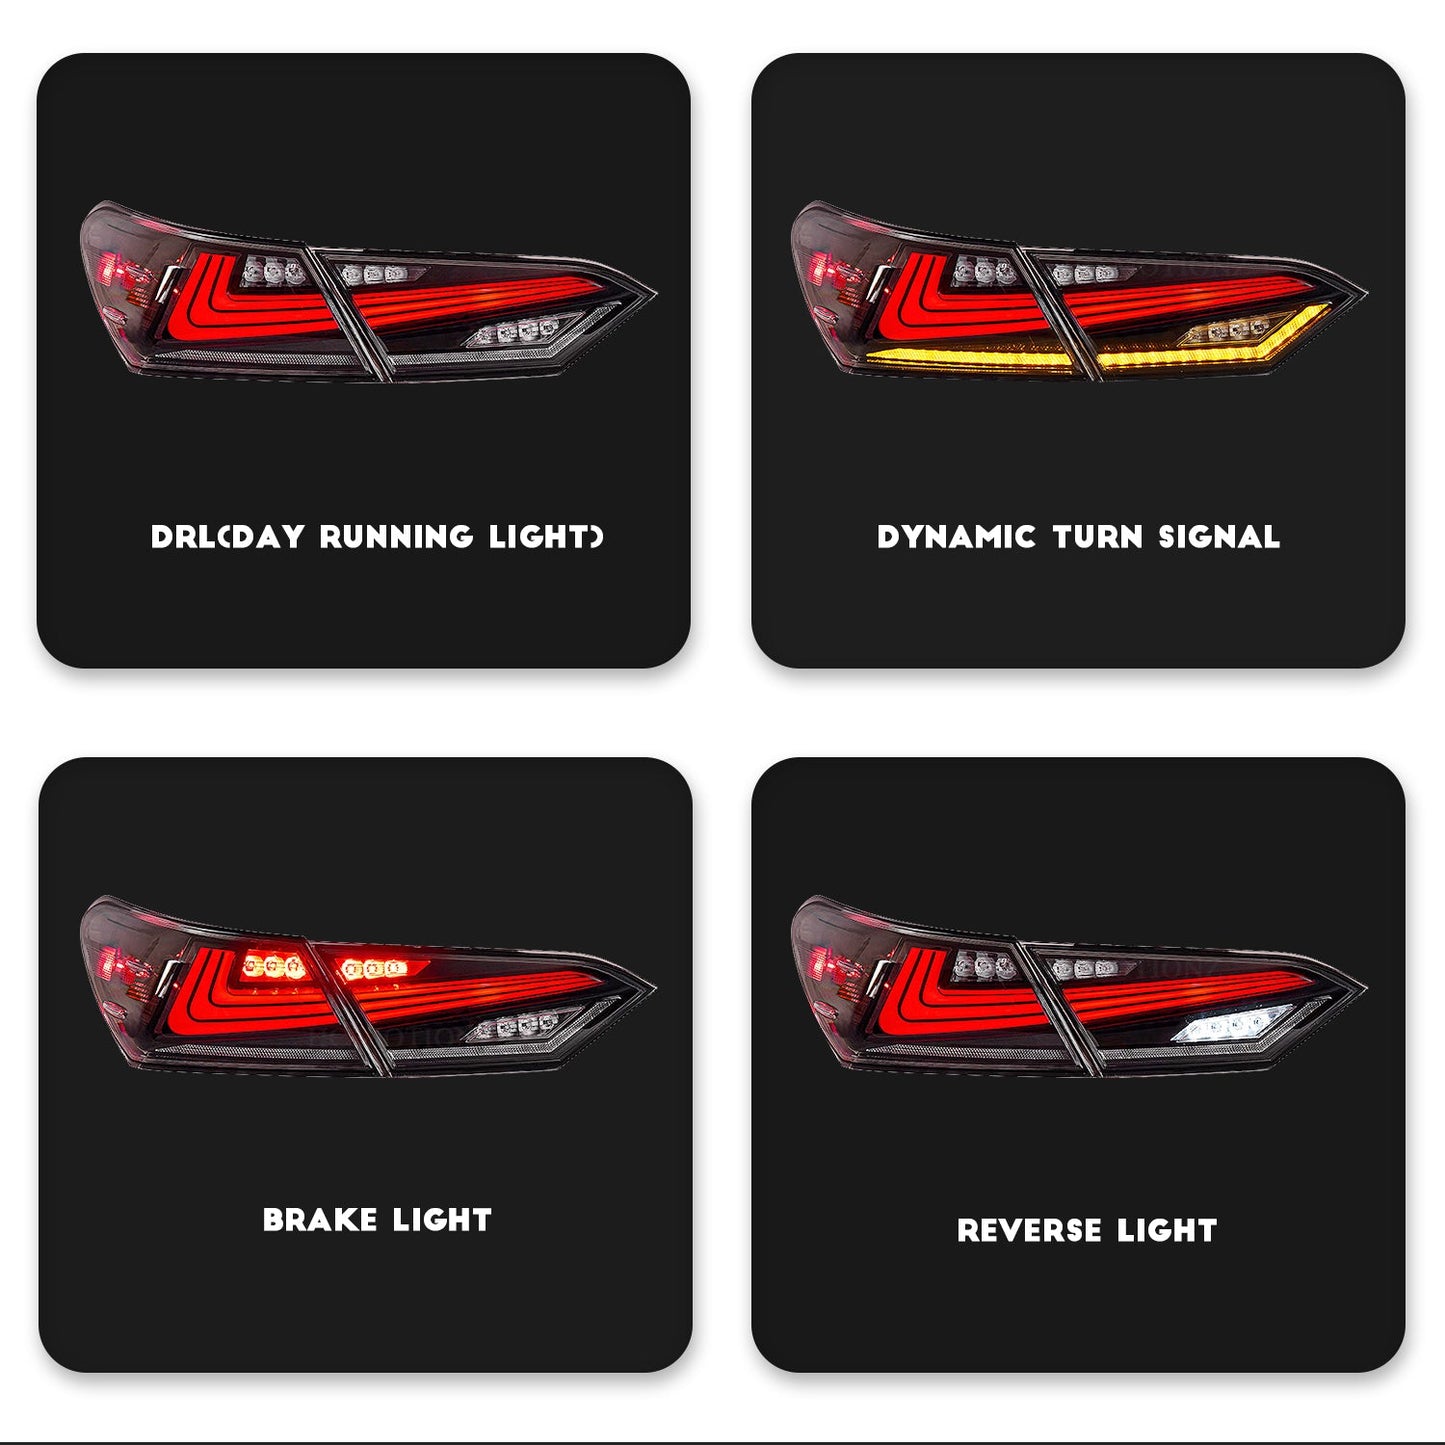 Taillights Fit Toyota Camry 2018-2021 - HCMOTION